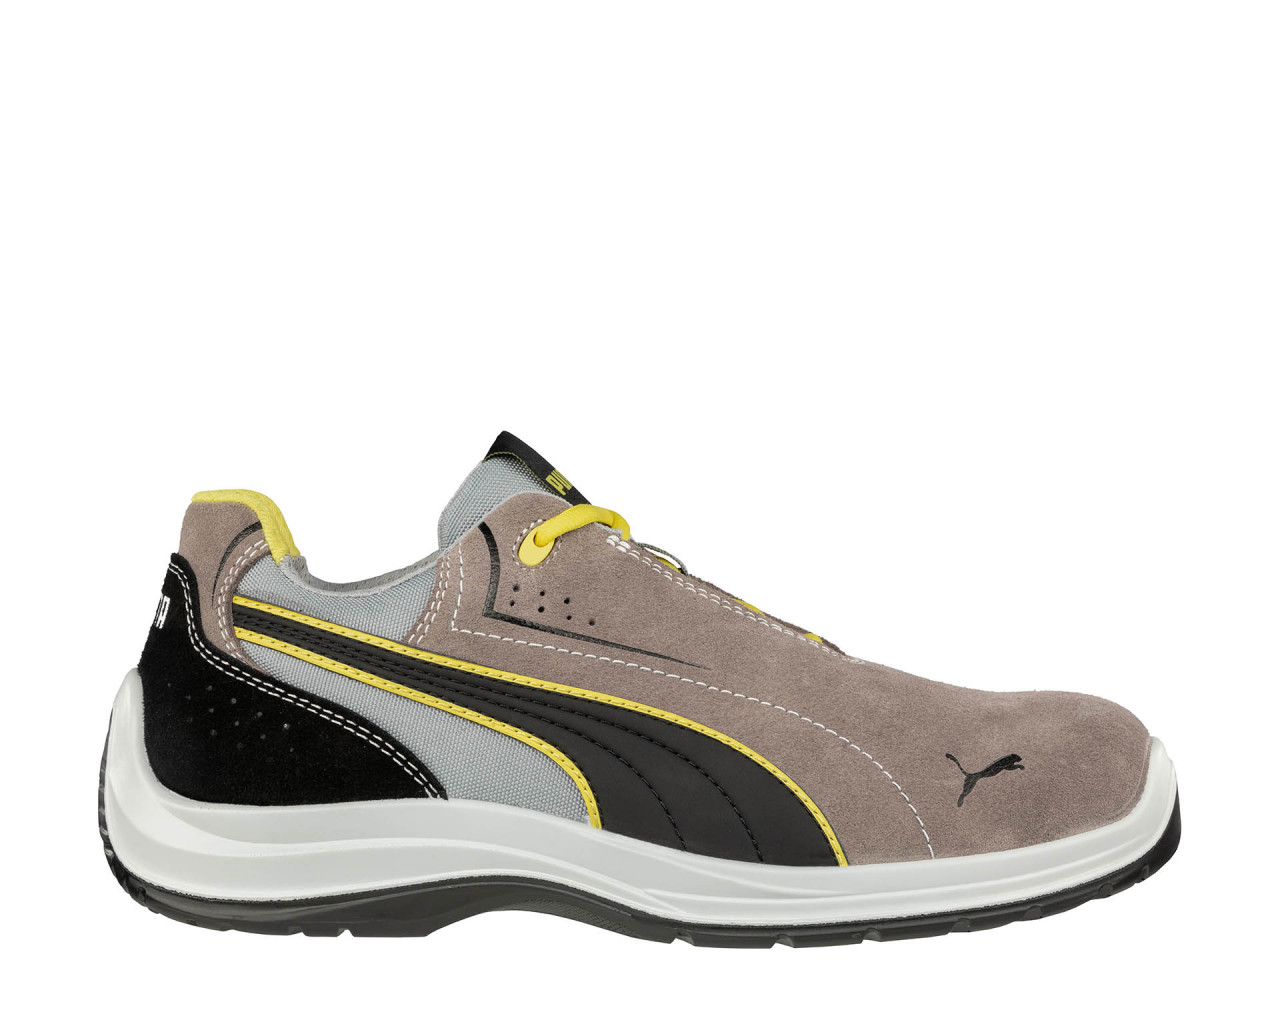 PUMA SAFETY TOURING STONE LOW S3 SRC